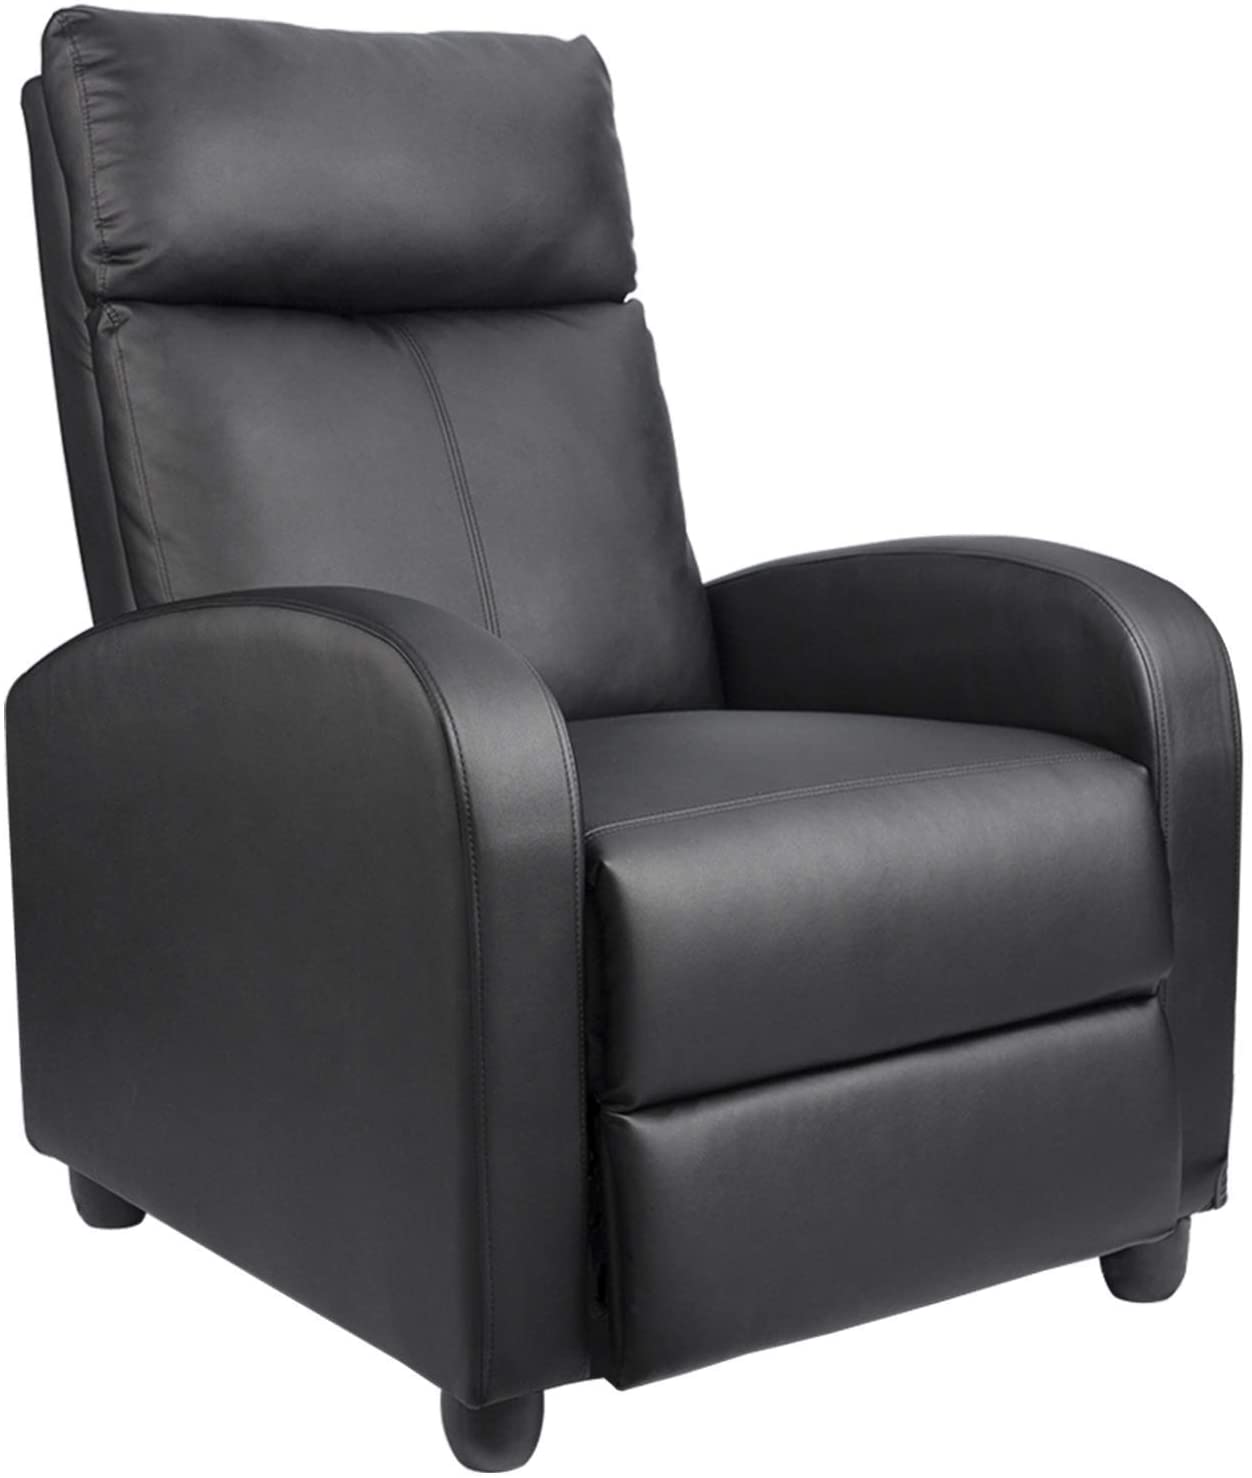 homall single recliner chair padded seat pu leather for living room